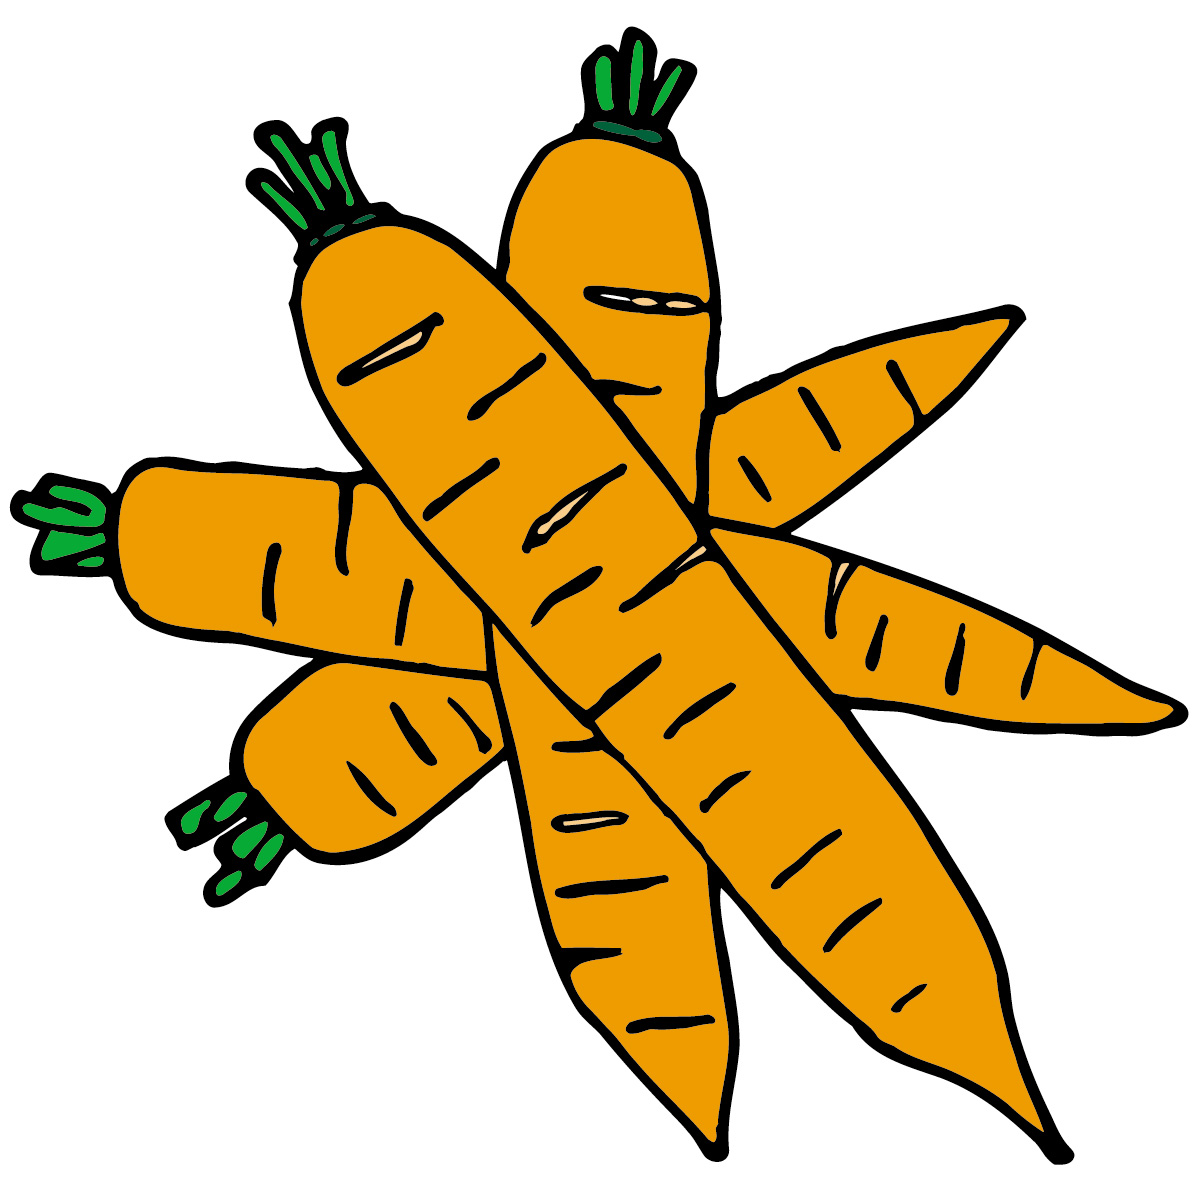     And Vegetables Border Clipart   Clipart Panda   Free Clipart Images